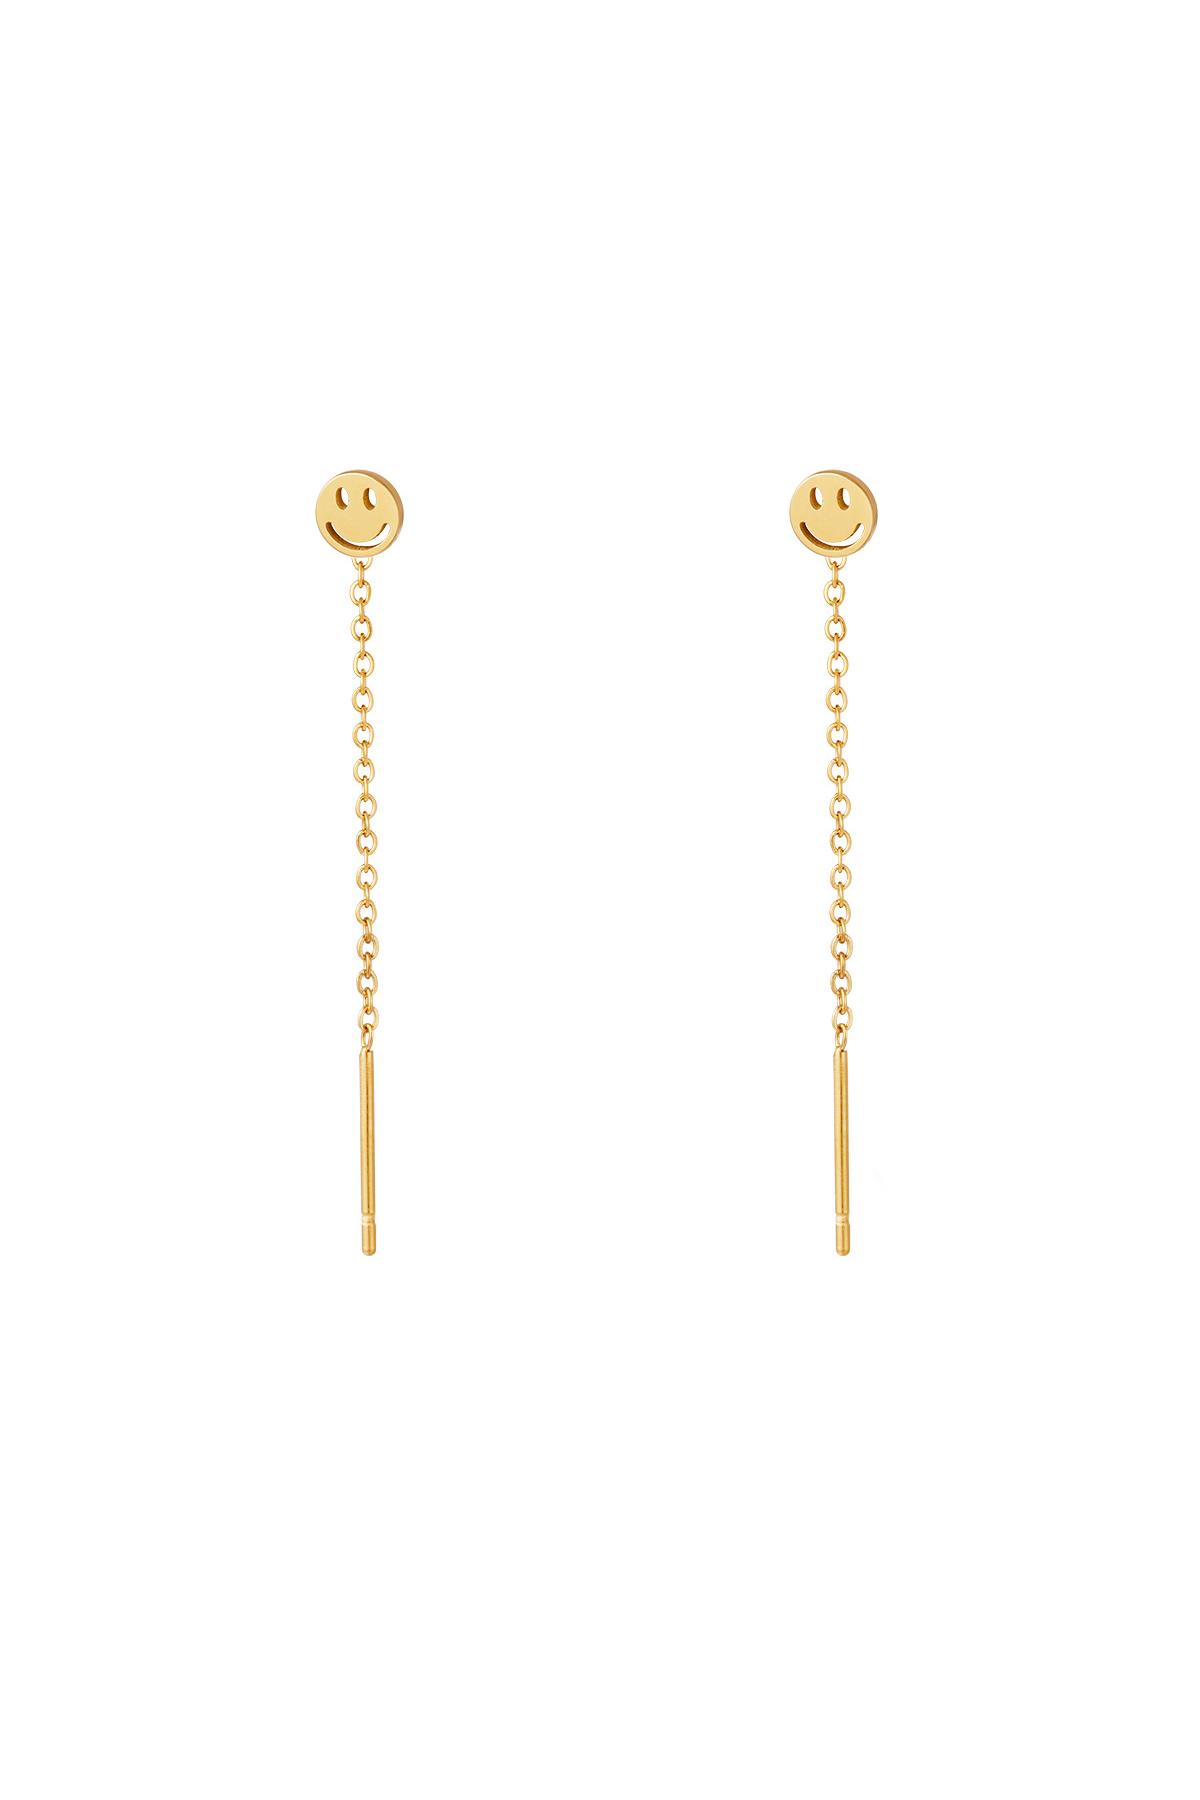 Gold / Stainless Steel Chain Earrings Smiley Gold 